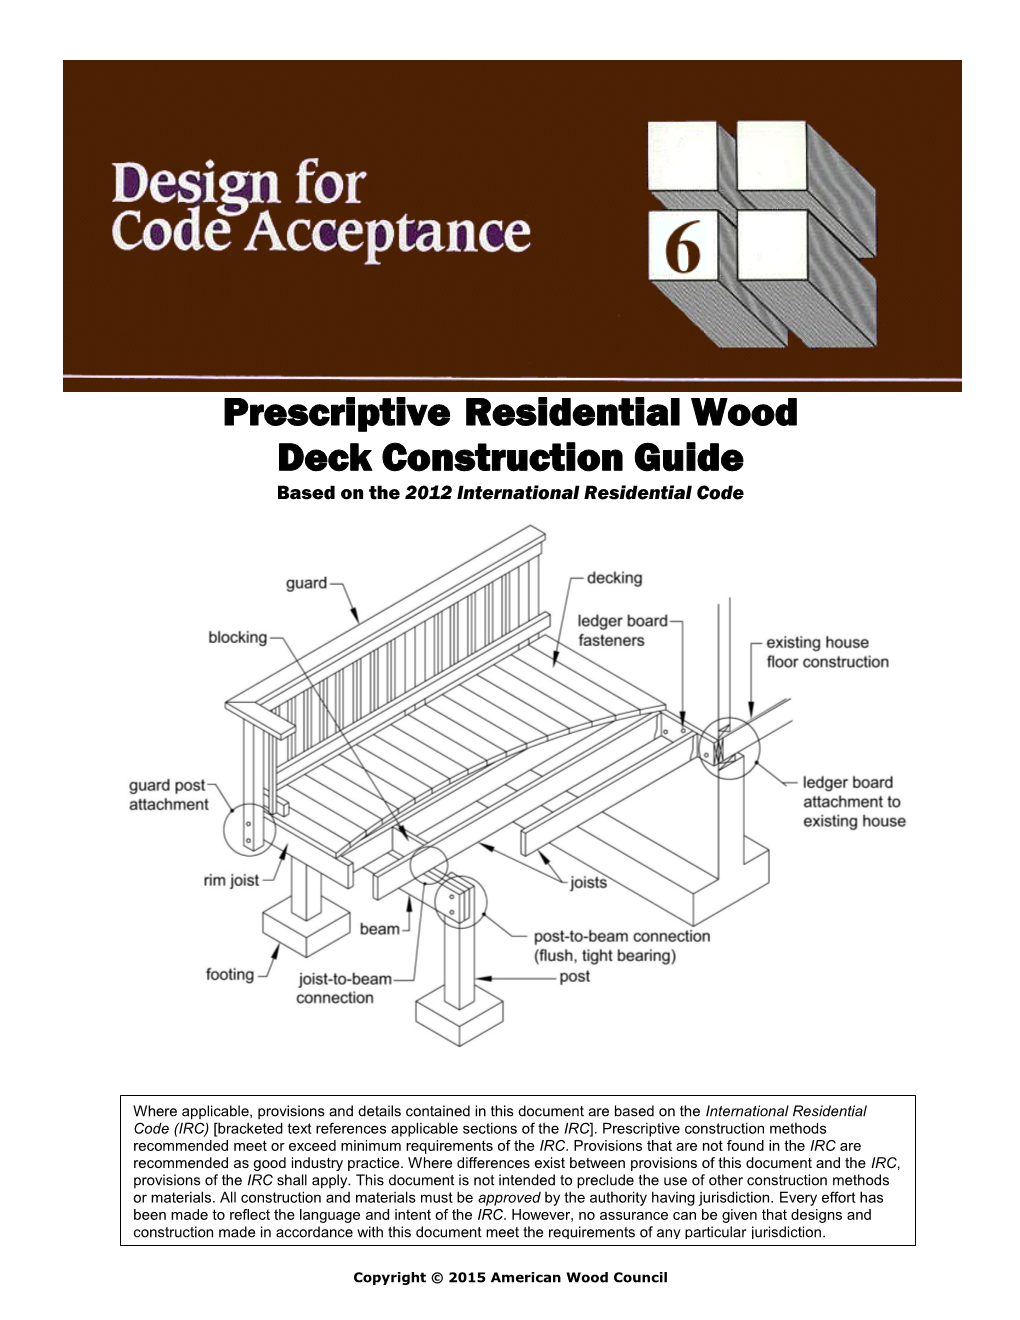 Wood Deck Construction Guide Based on the 2012 International Residential Code